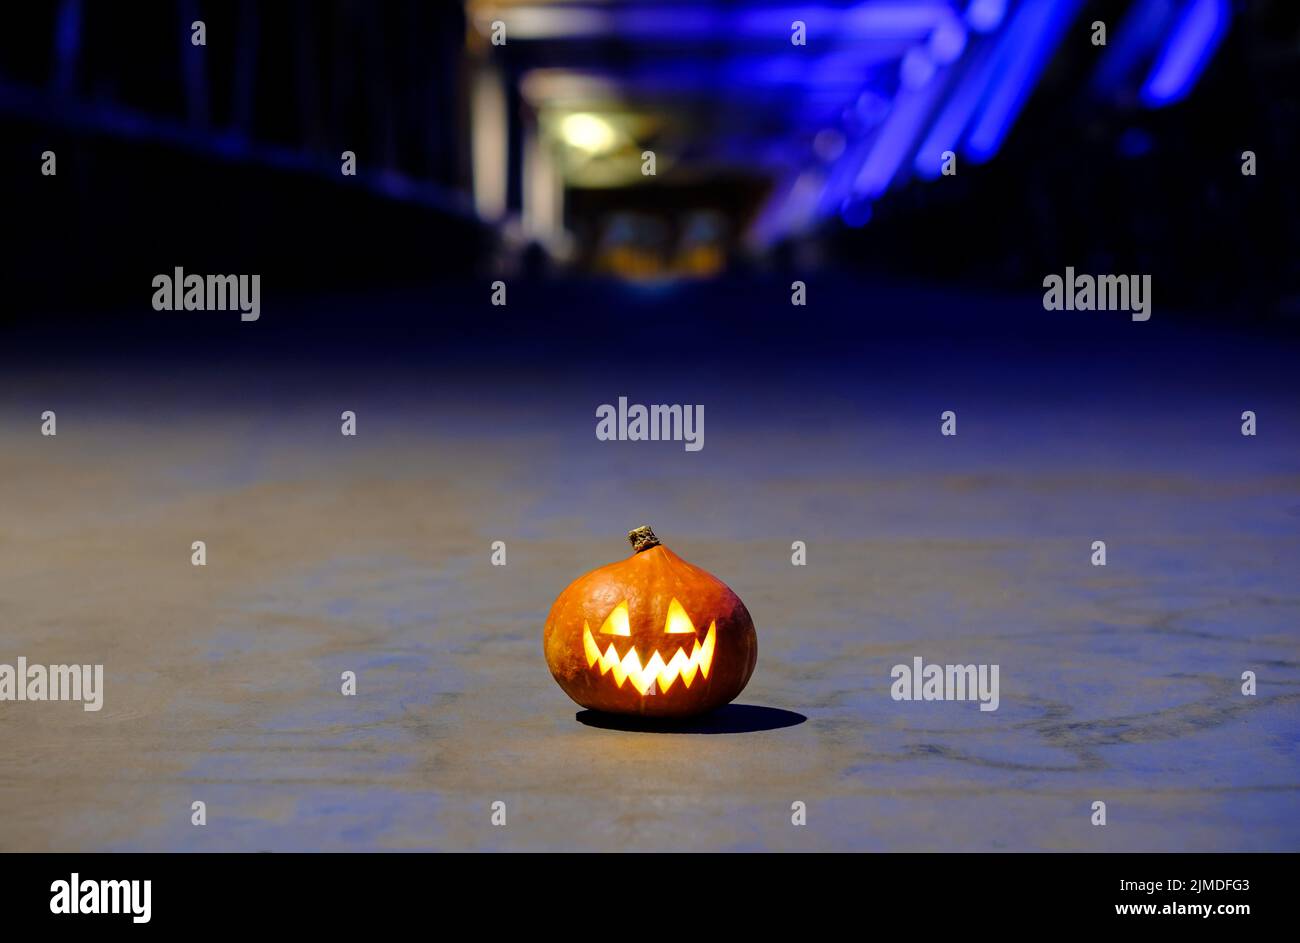 Halloween pumpkin in the dark on a blue industrial abstract background. Blurry colored lights. Stock Photo